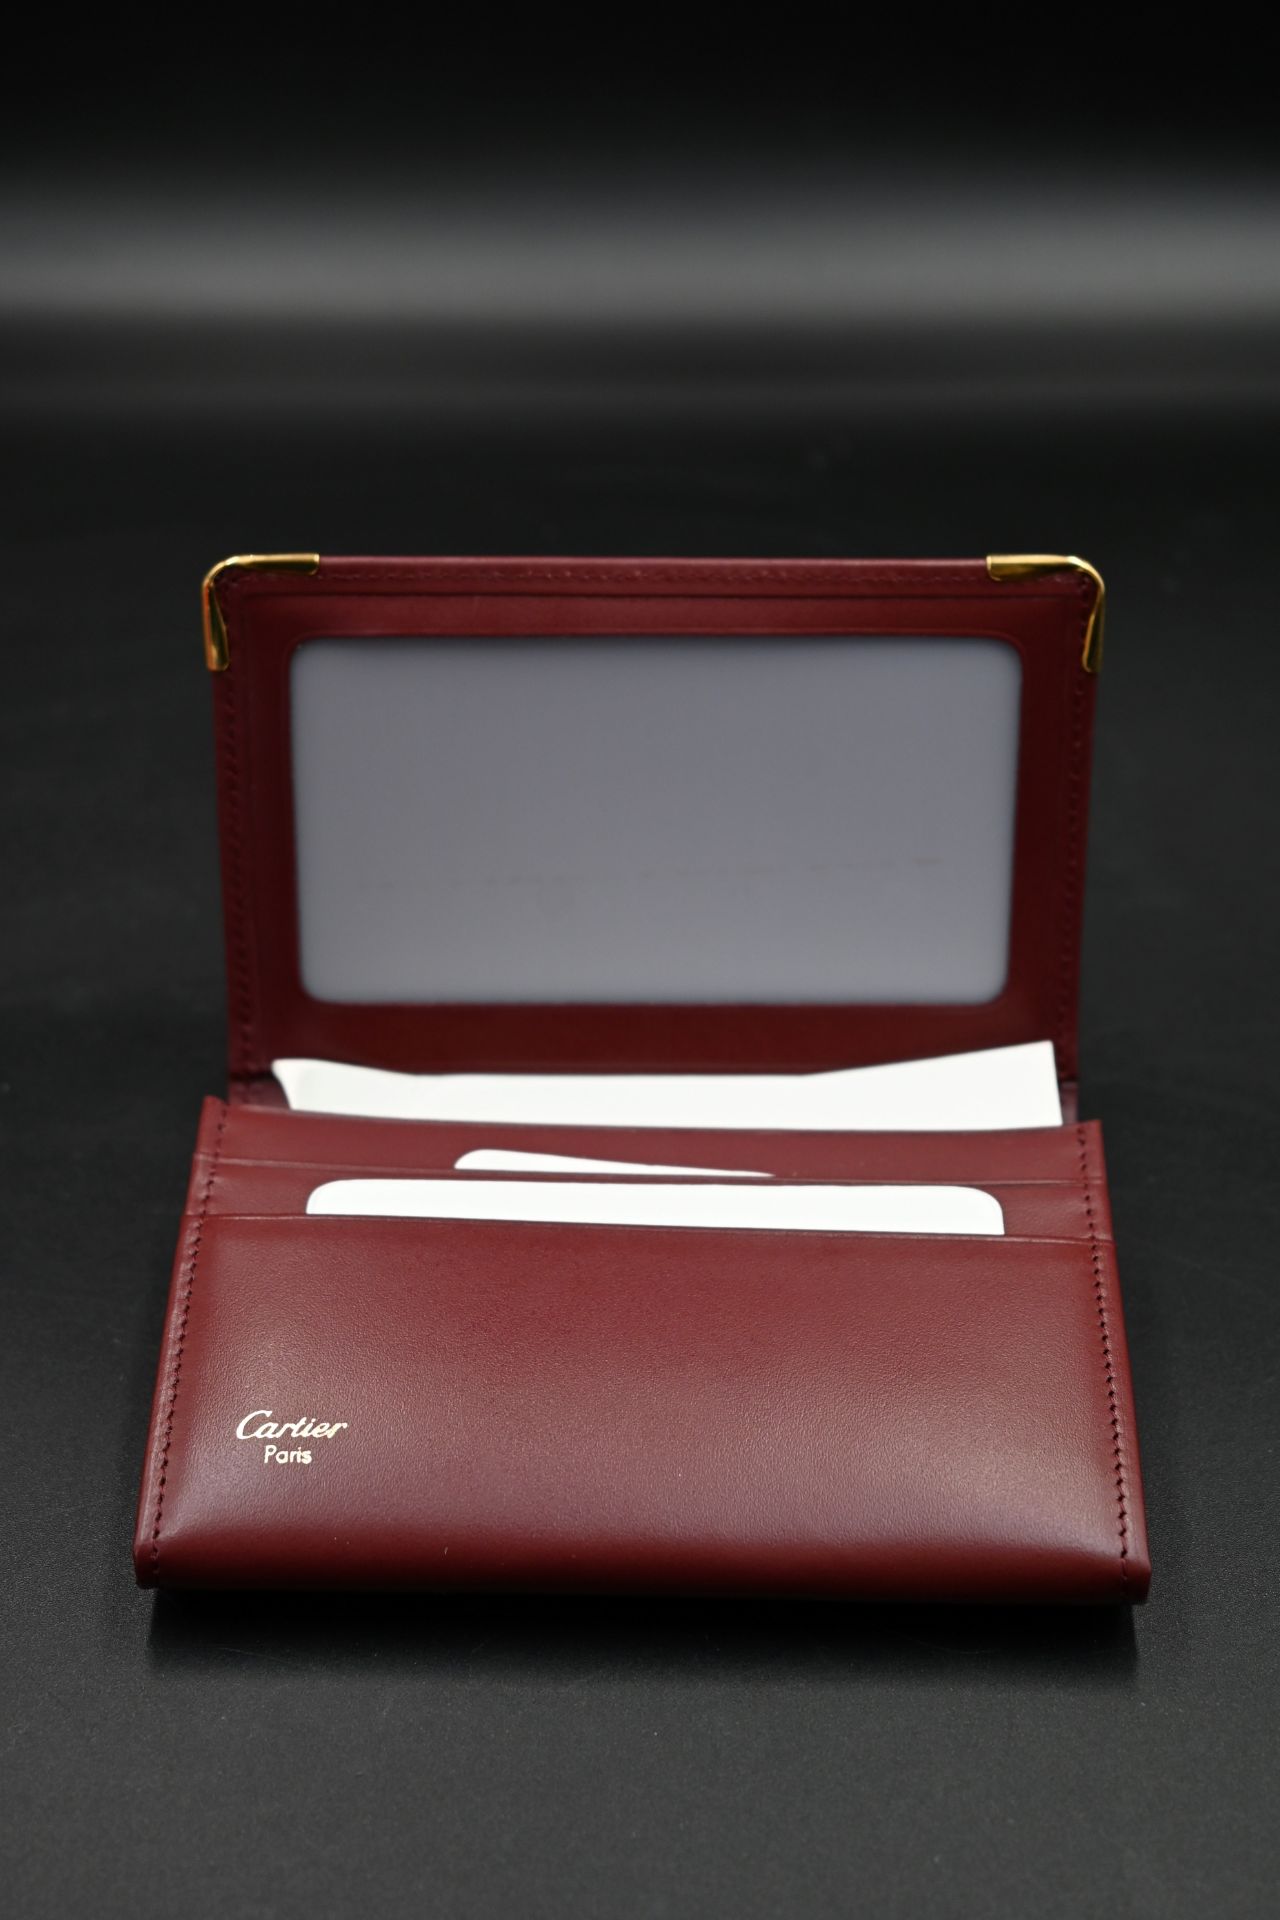 Cartier calf skin leather credit card wallet embossed with makers logo to centre,and with gold - Image 5 of 7